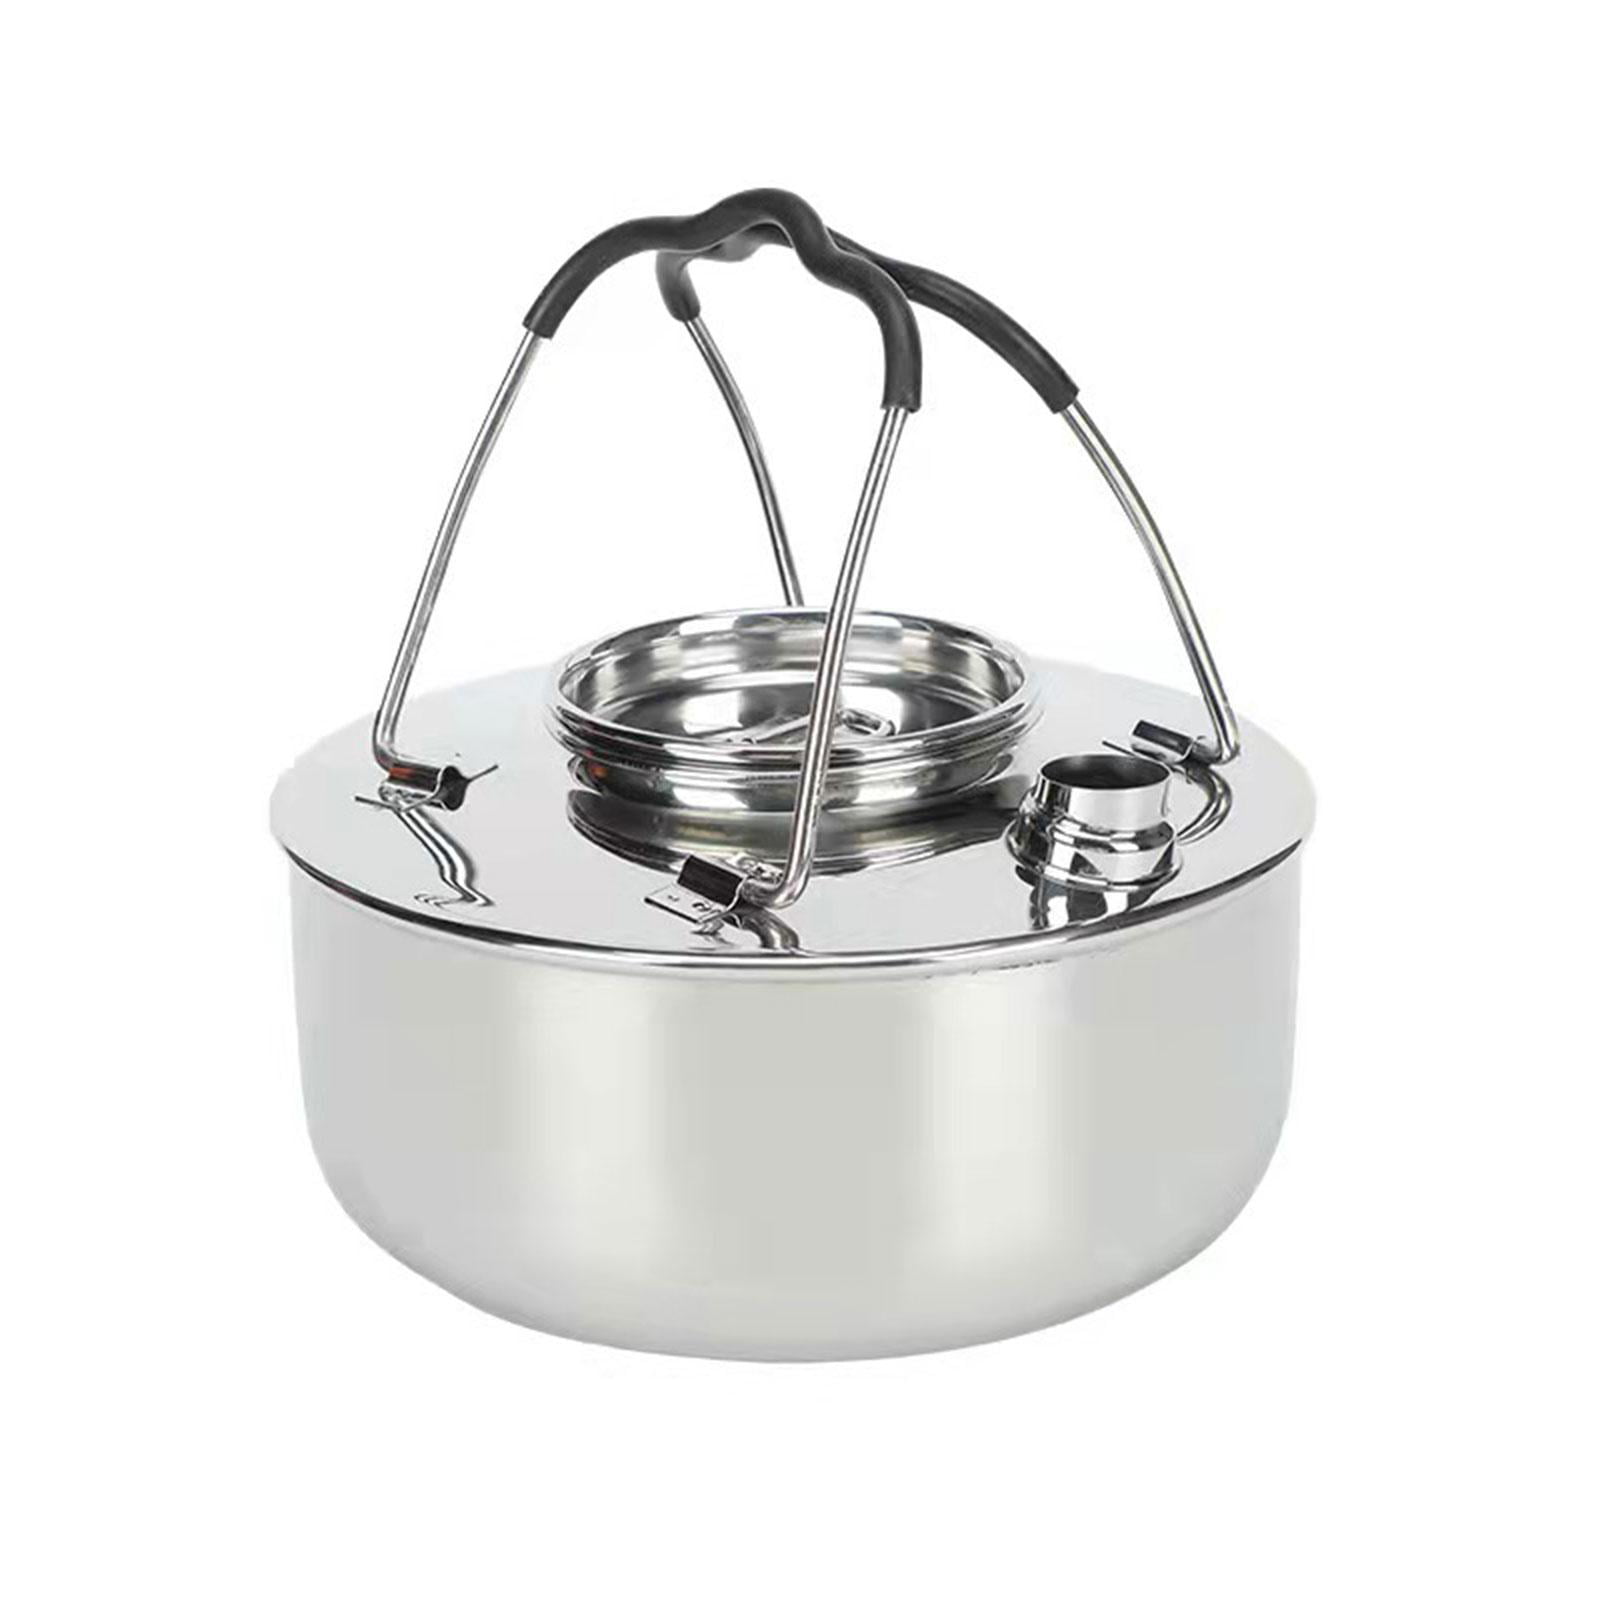 Outdoor Camping Kettle Lightweight Works with Campfires 1.5-Liter -  ShopiPersia